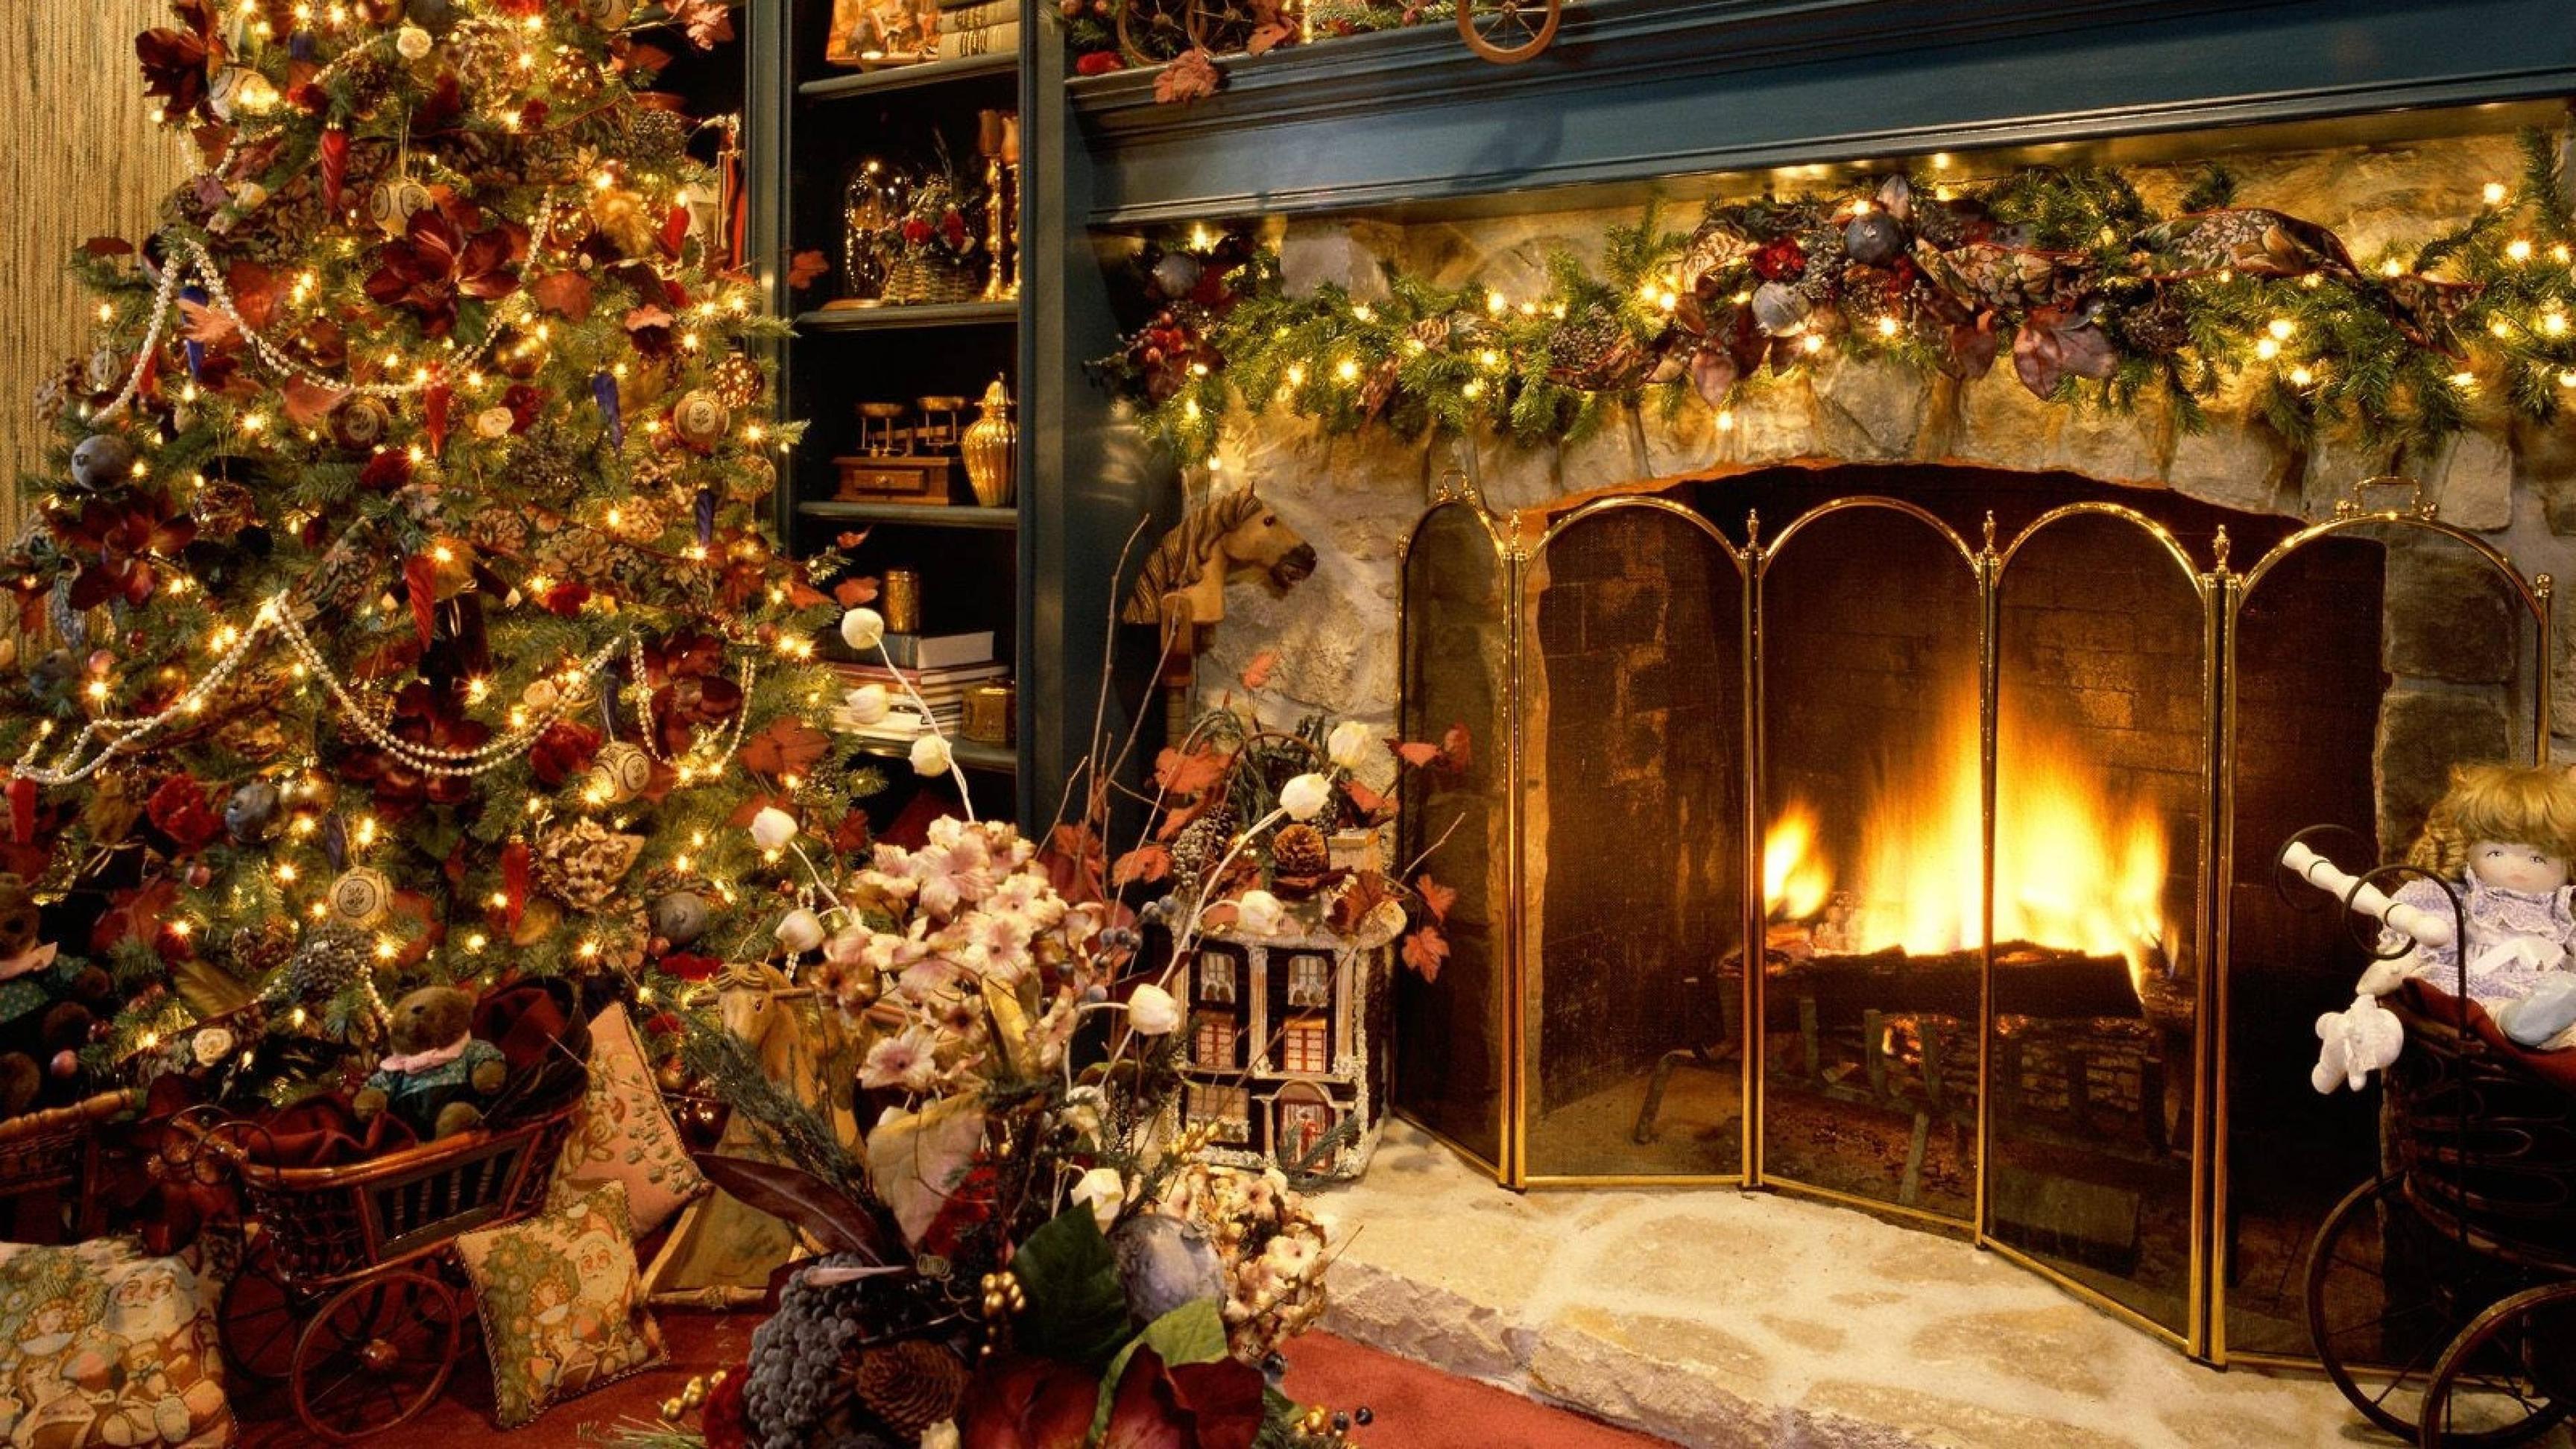 Download Wallpaper 3840x2160 new year, christmas, fireplace, fur